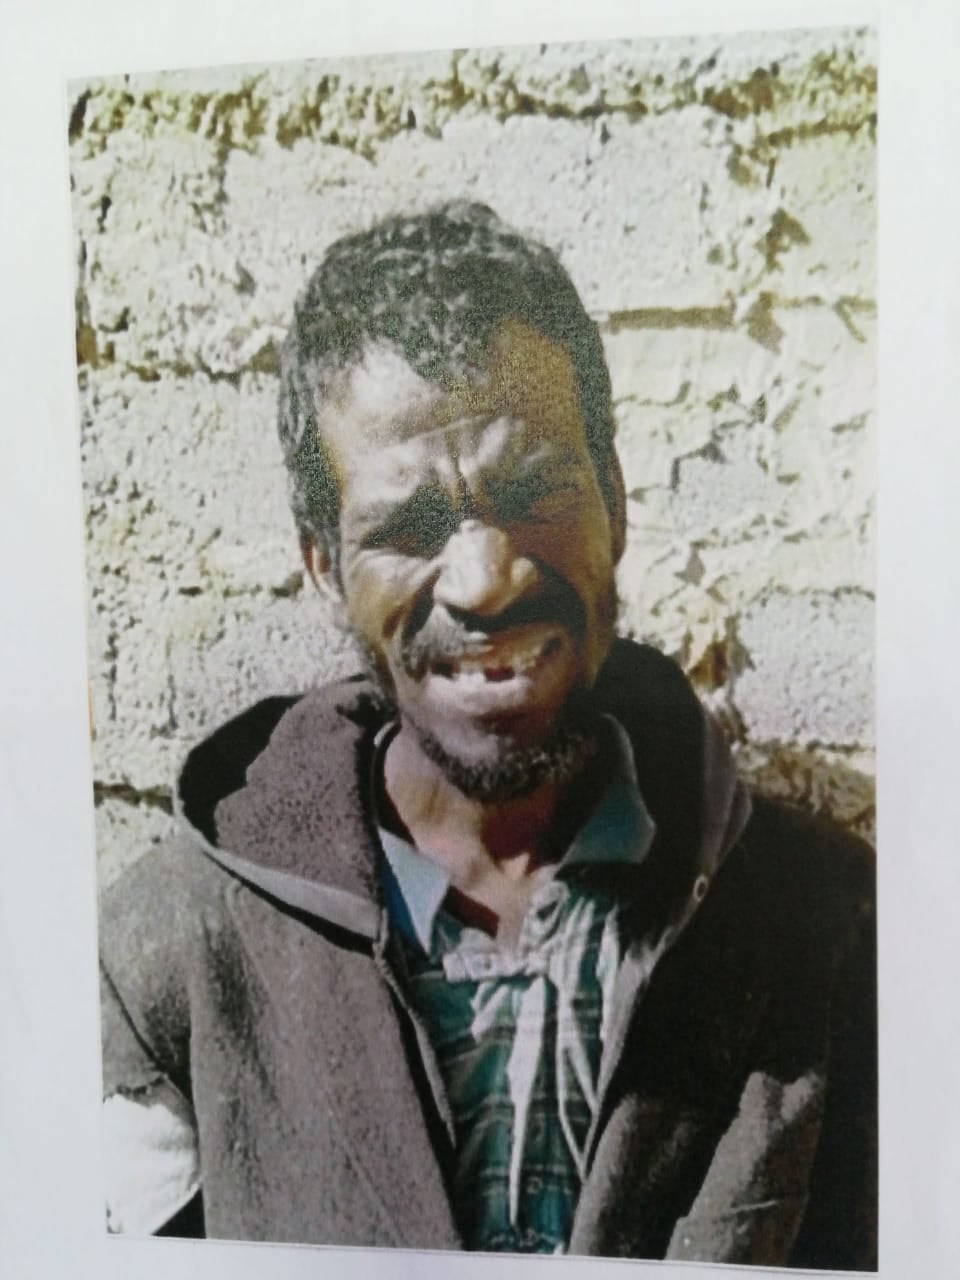 Community assistance requested to locate a missing man